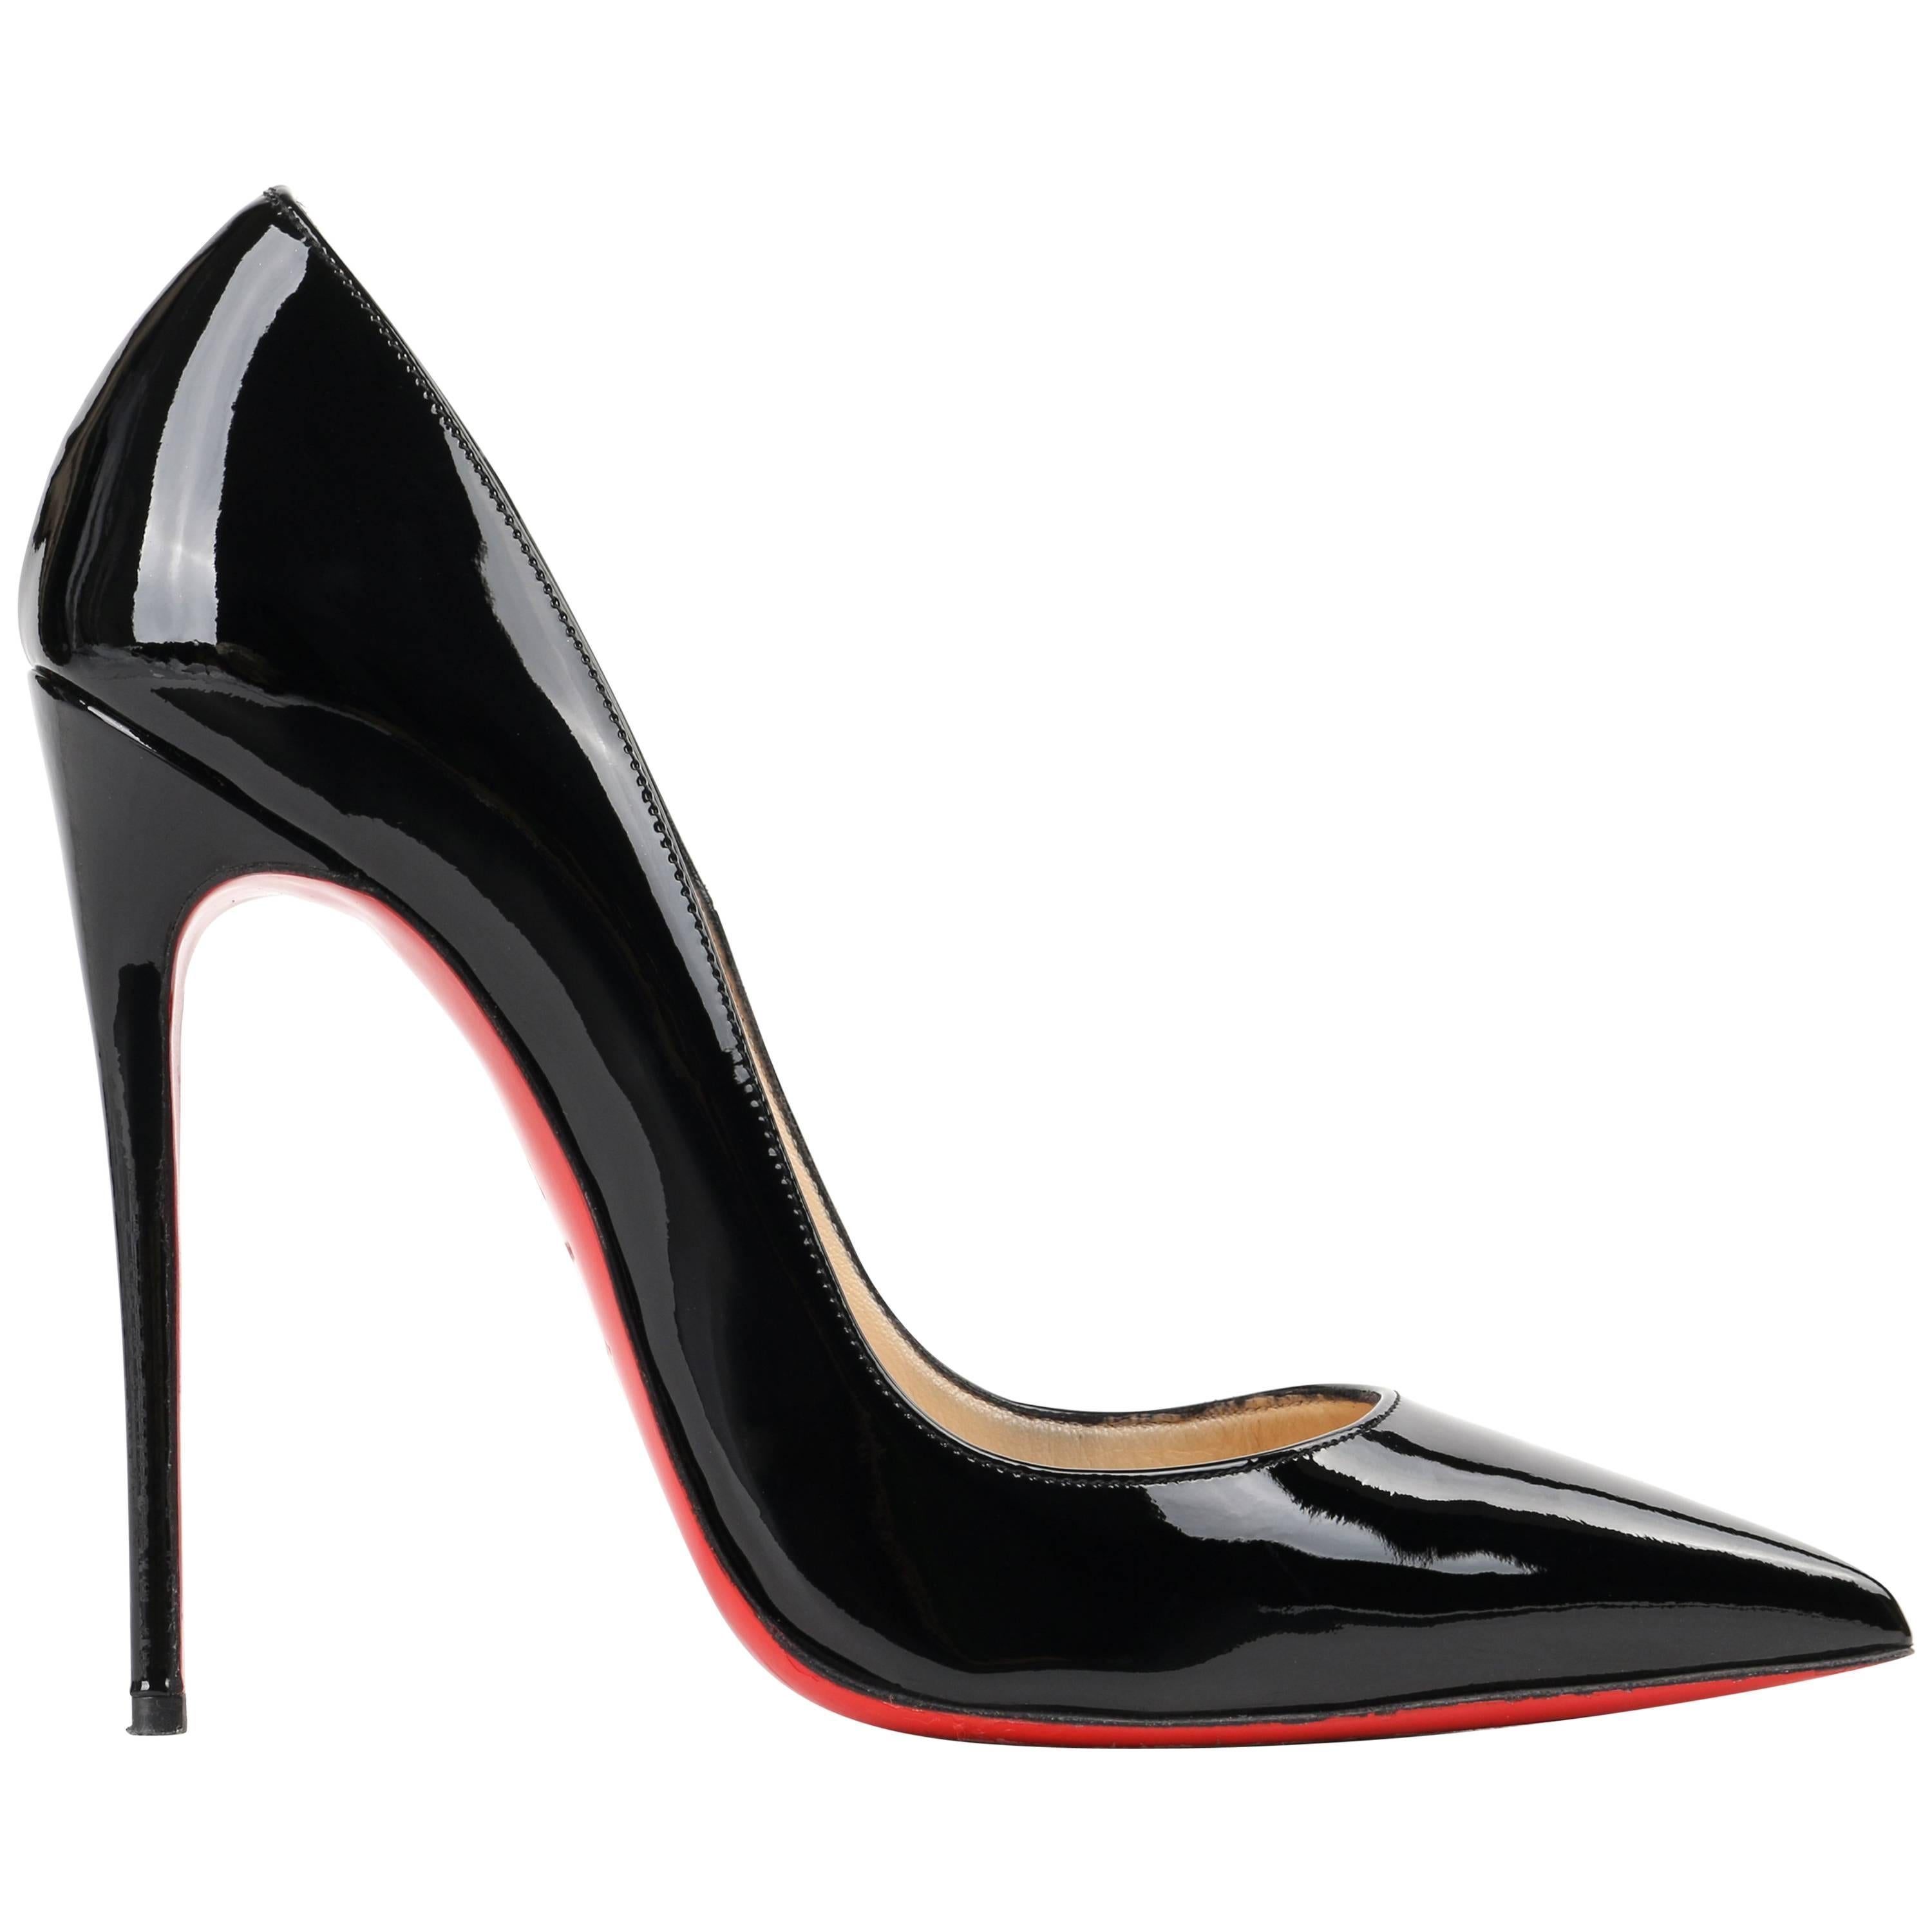 CHRISTIAN LOUBOUTIN "So Kate" 120 mm Black Patent Leather Pointed Toe Pump Heels